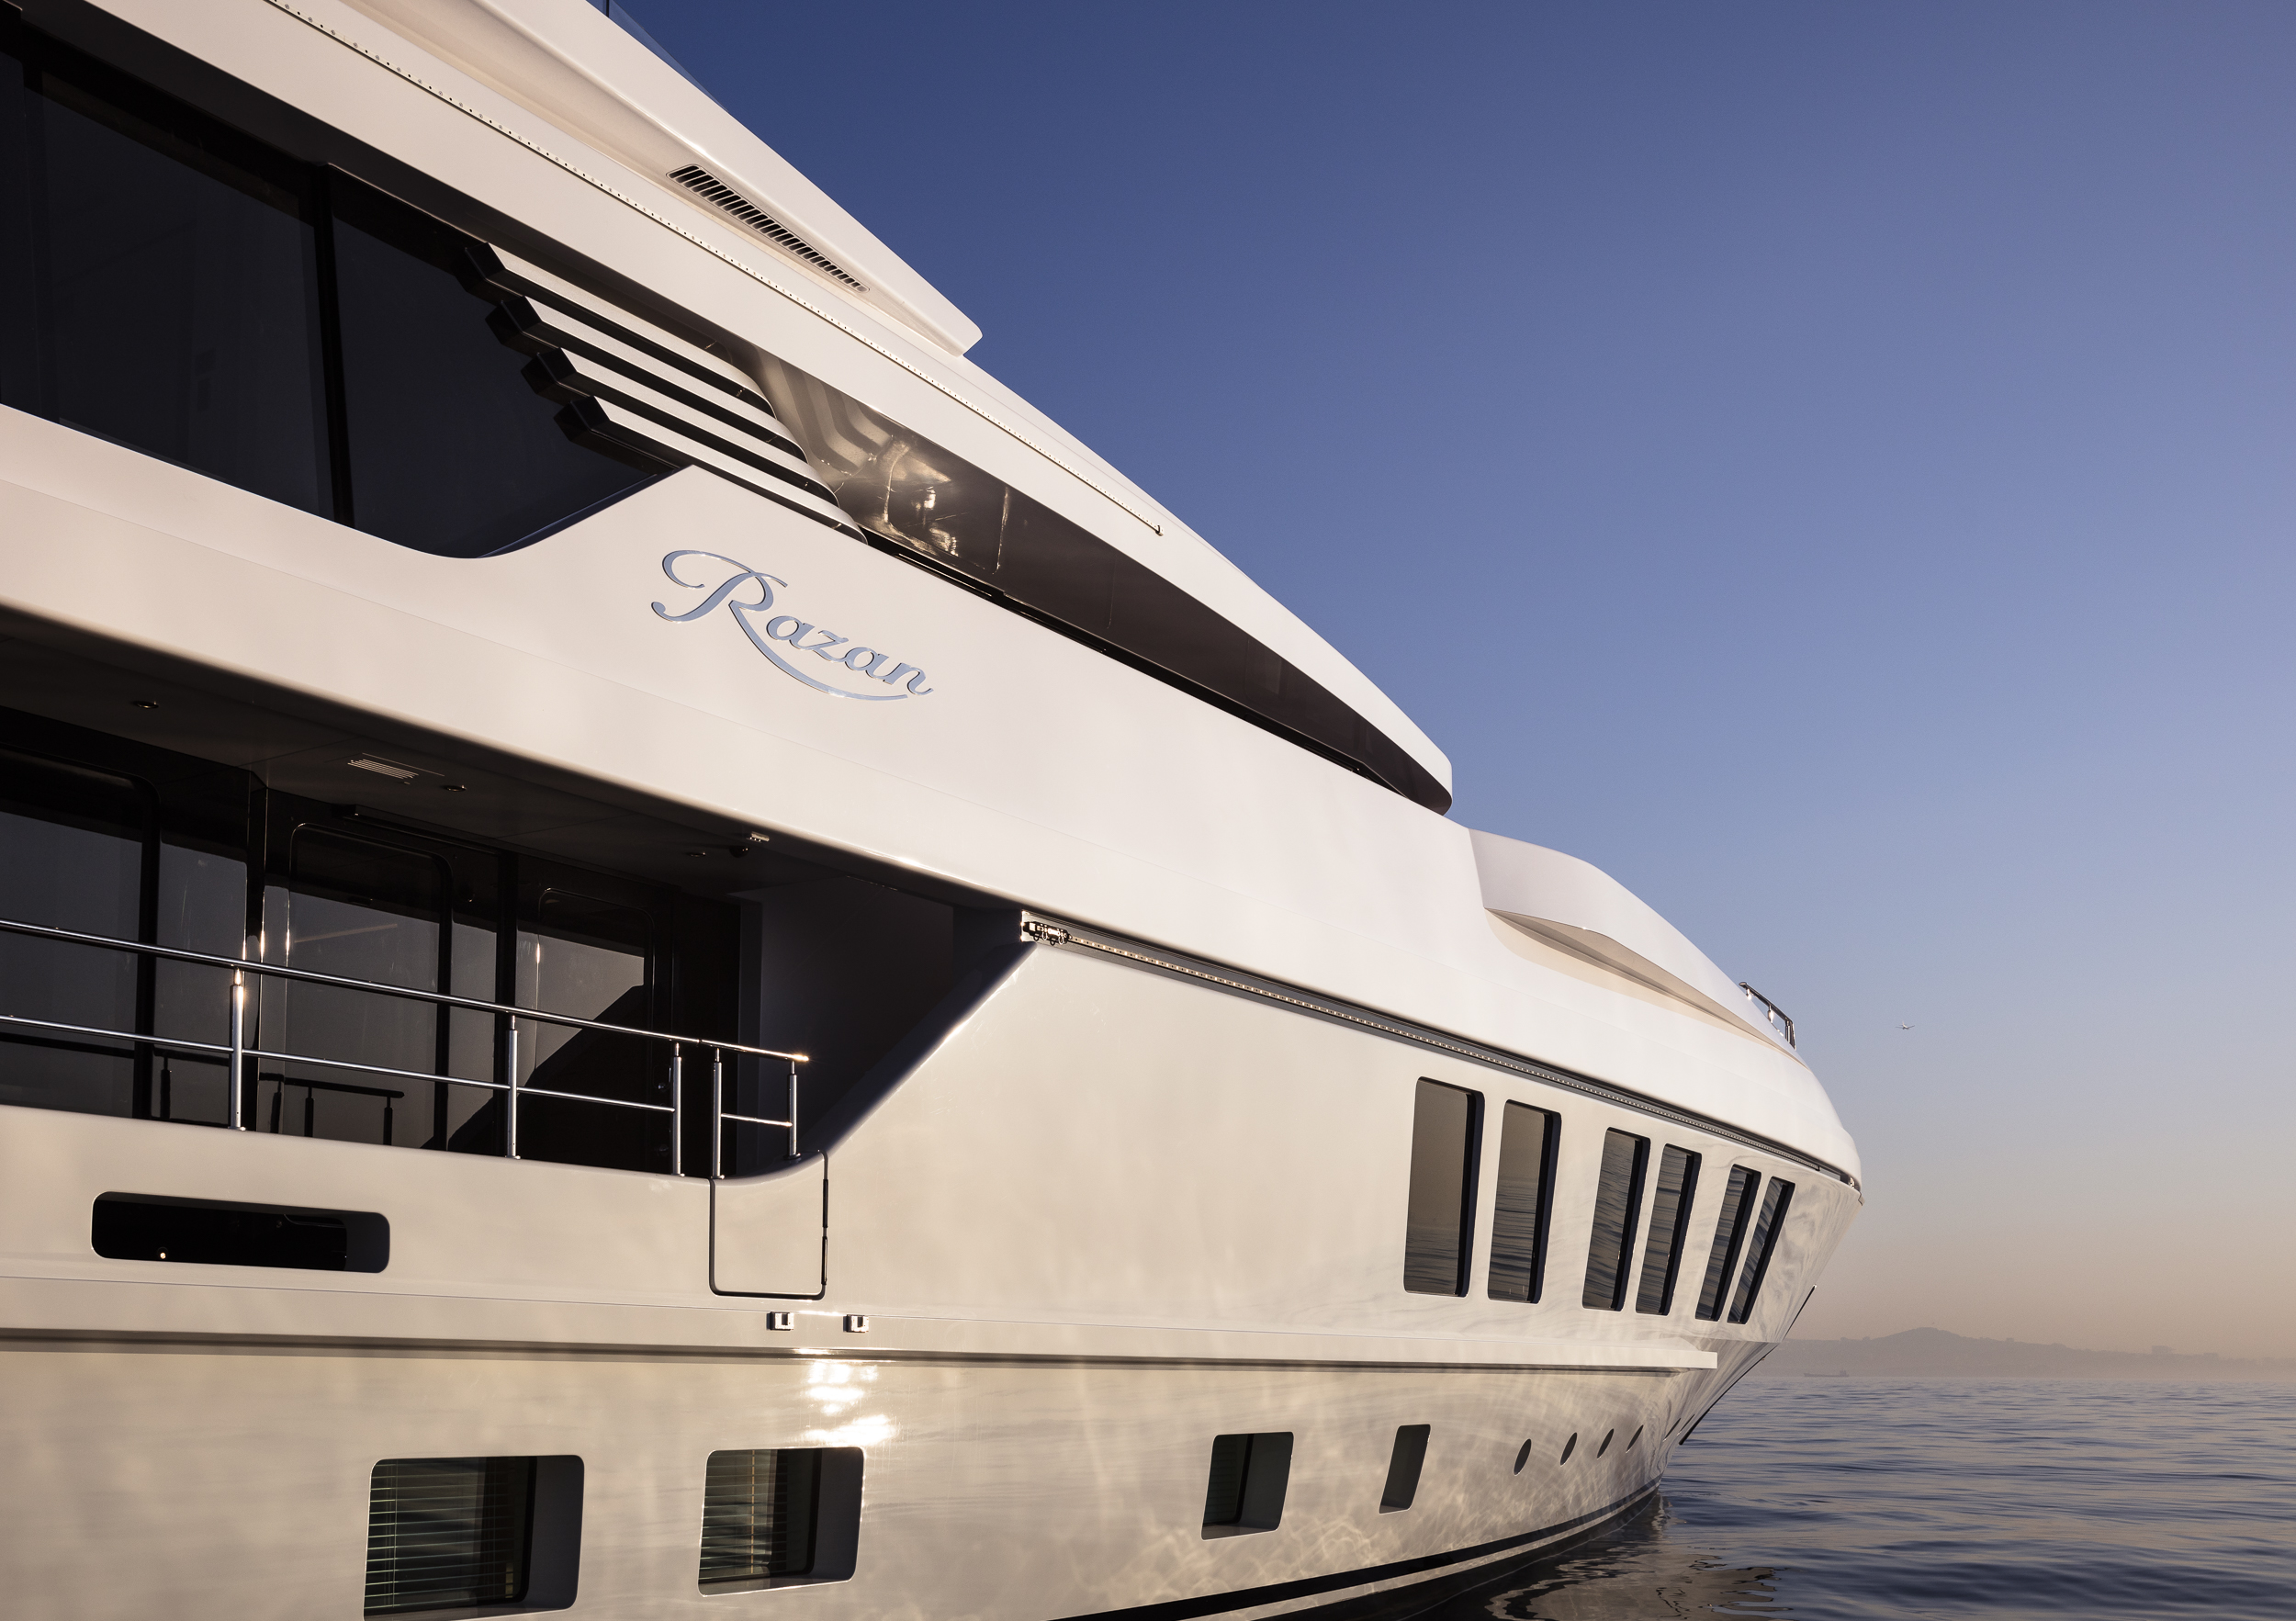 47 m Razan specs with detailed specification and builder summary